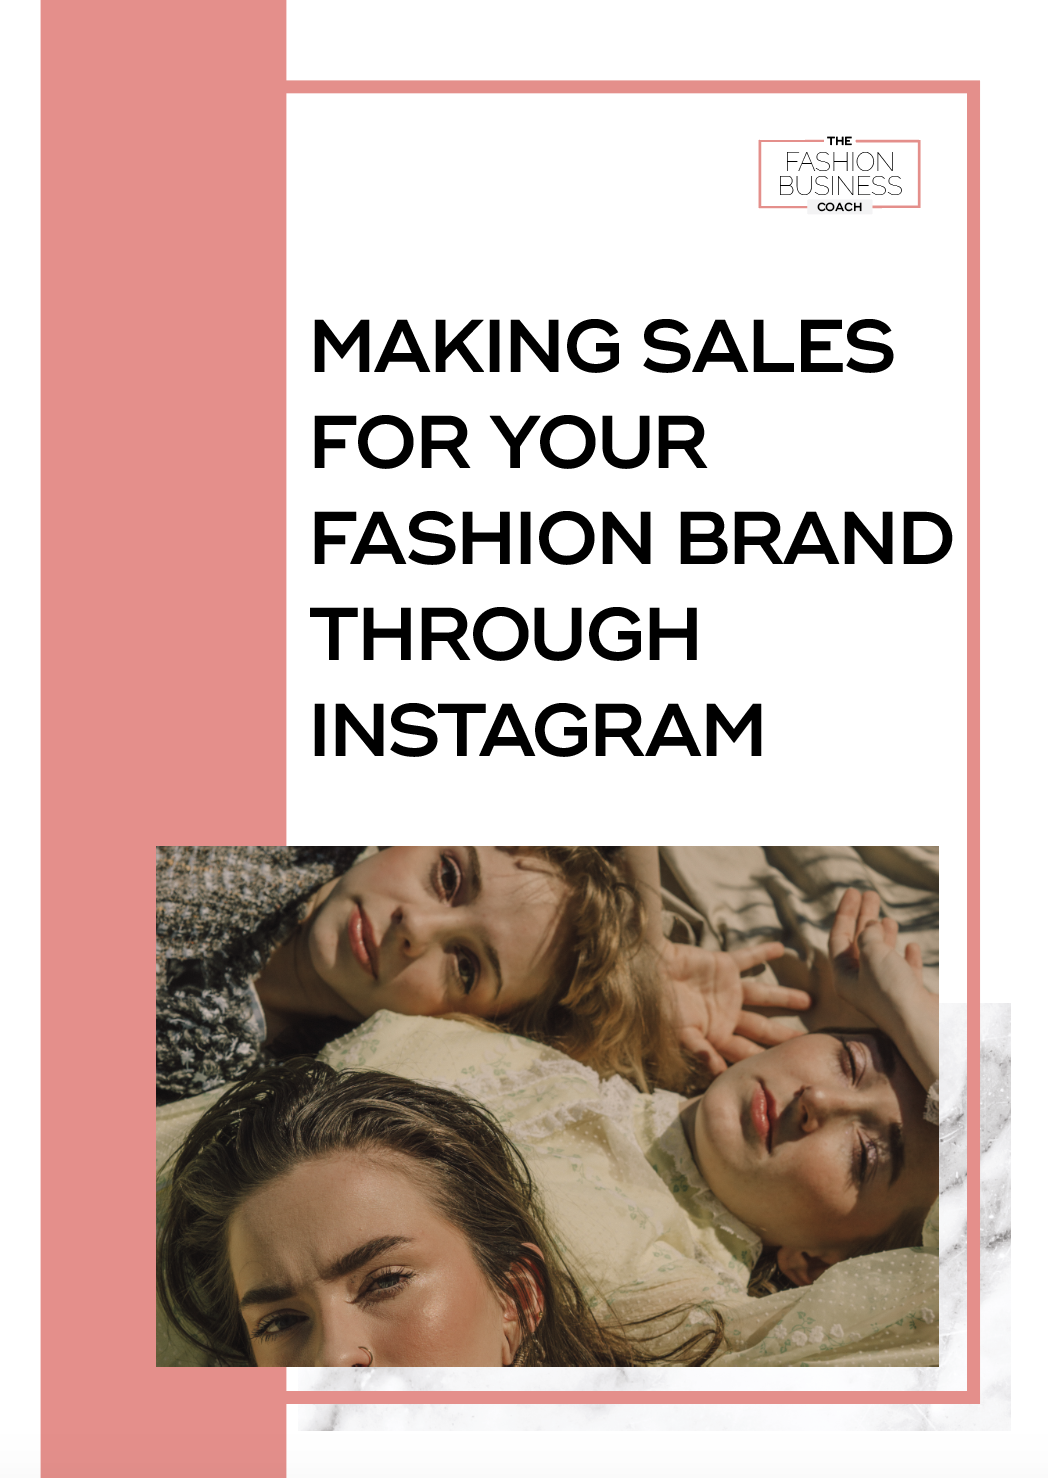 Making Sales for Your Fashion Brand Through Instagram 1.png